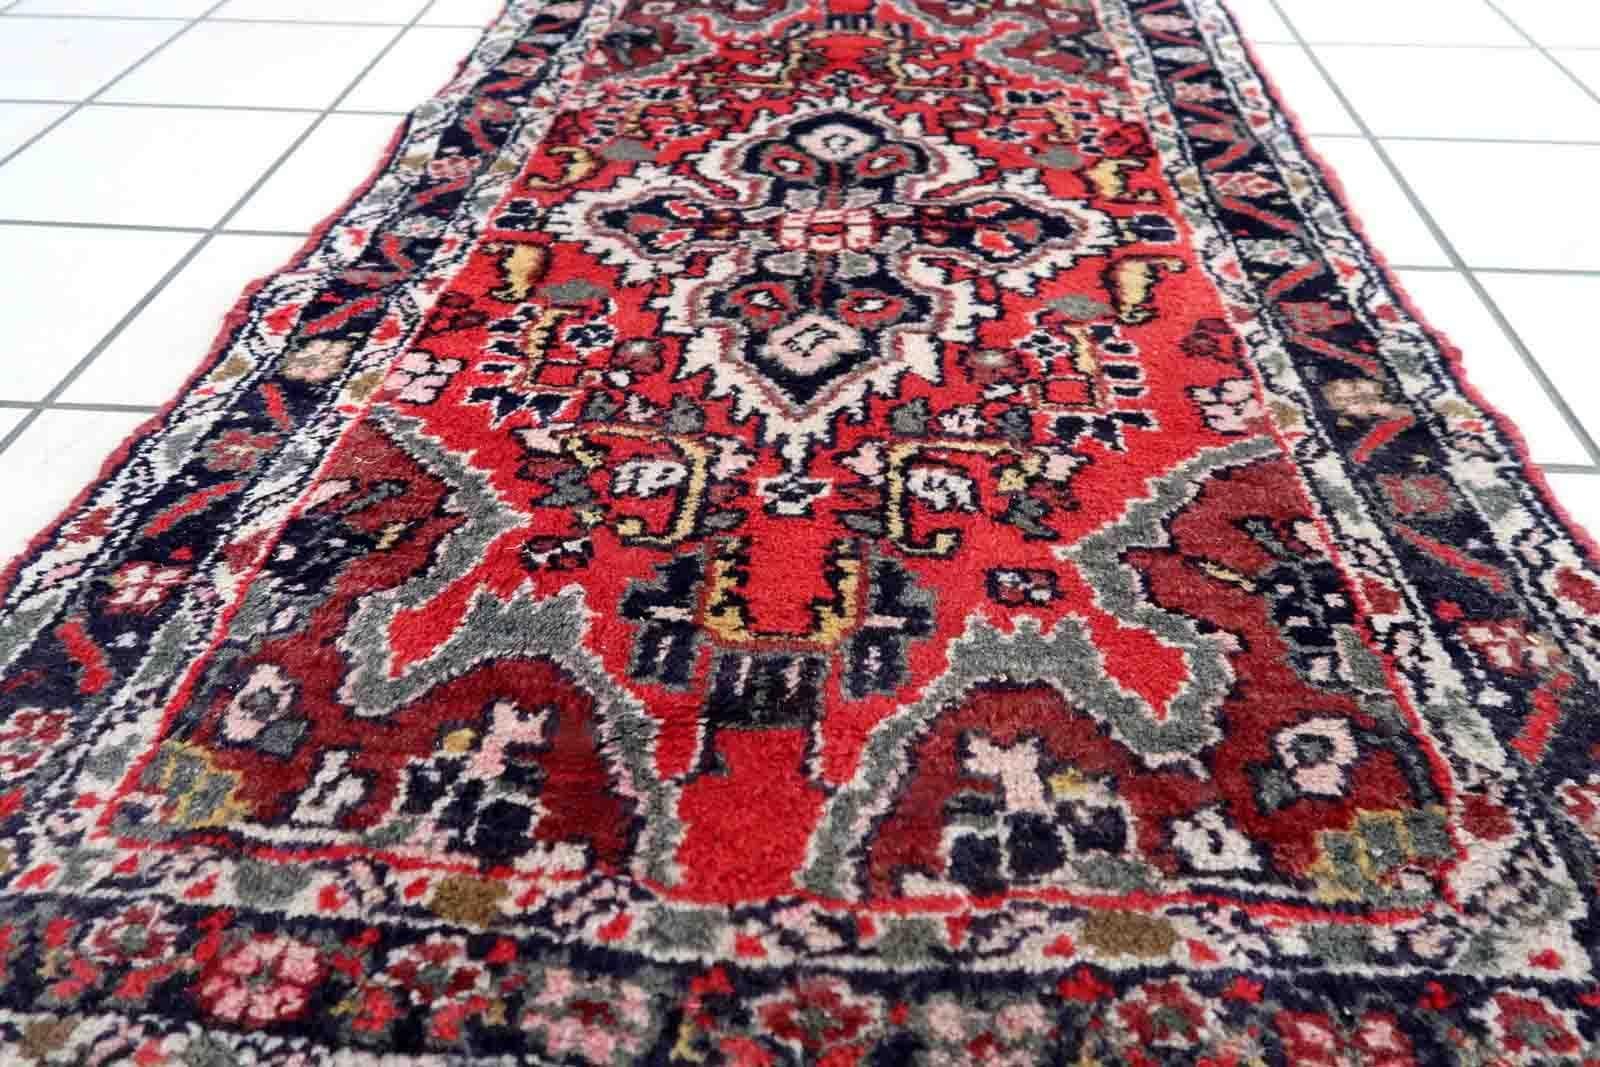 Handmade vintage Middle Eastern rug in traditional medallion design. The rug has been made in wool in the end of 20th century. It is in original good condition.

-condition: original good,

-circa: 1970s,

-size: 2.1' x 3.6' (67cm x